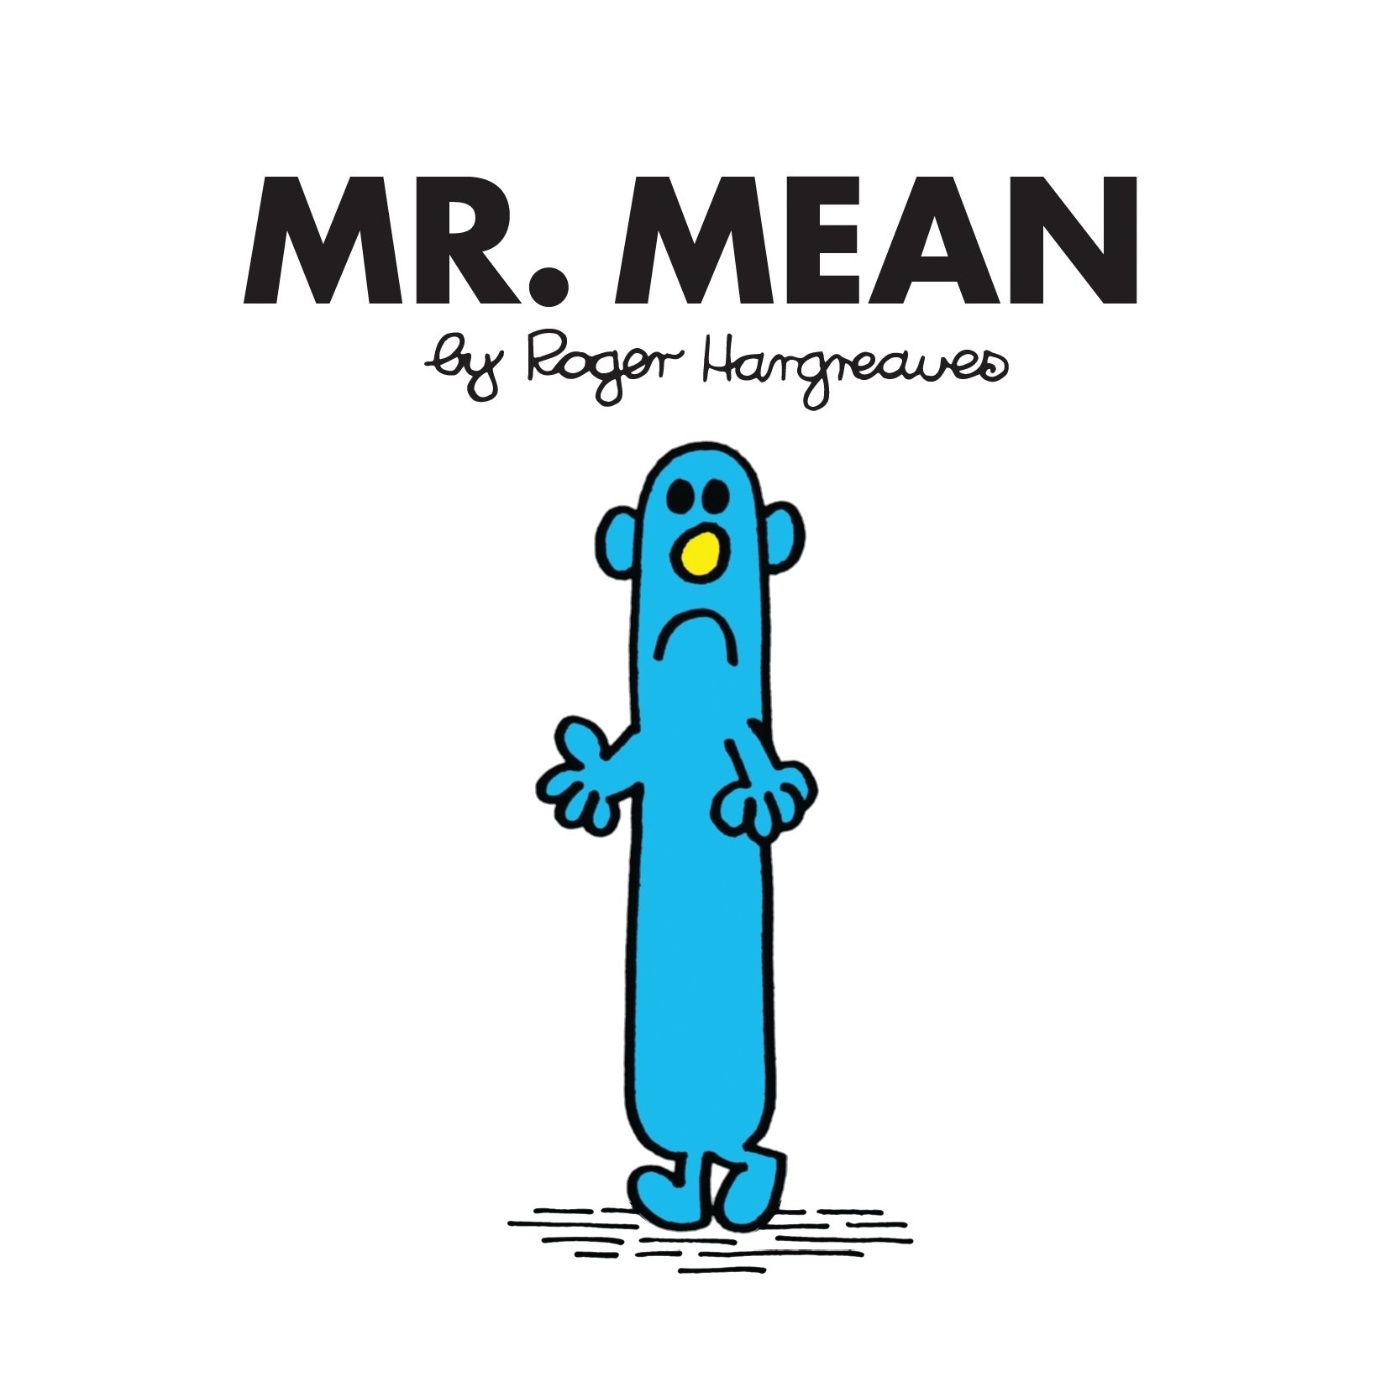 Mr. Mean by Roger Hargreaves 19 of 24 Tribute - Read by Martyn Kenneth